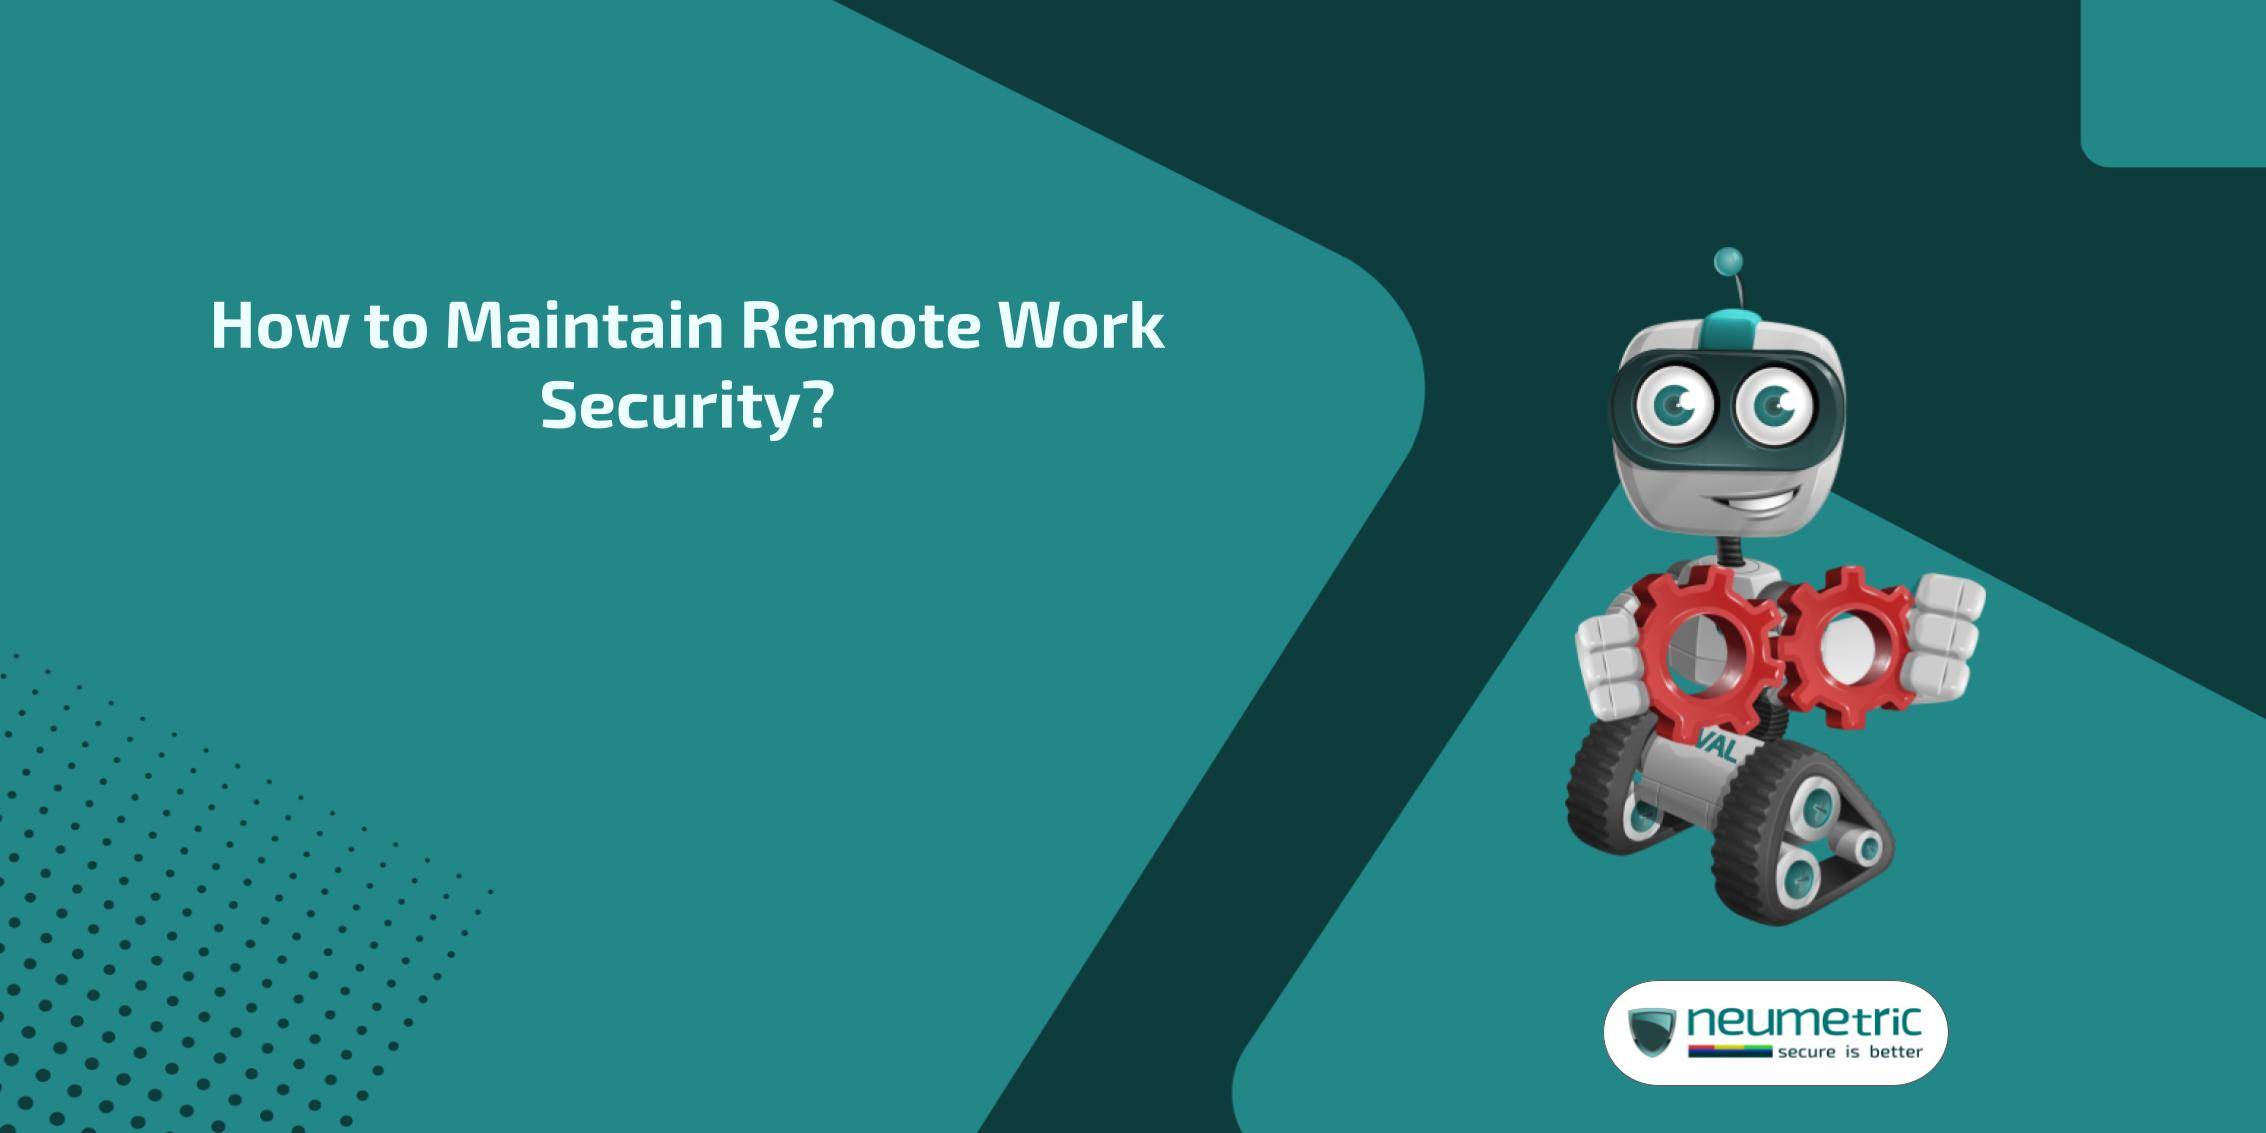 How to Maintain Remote Work Security?